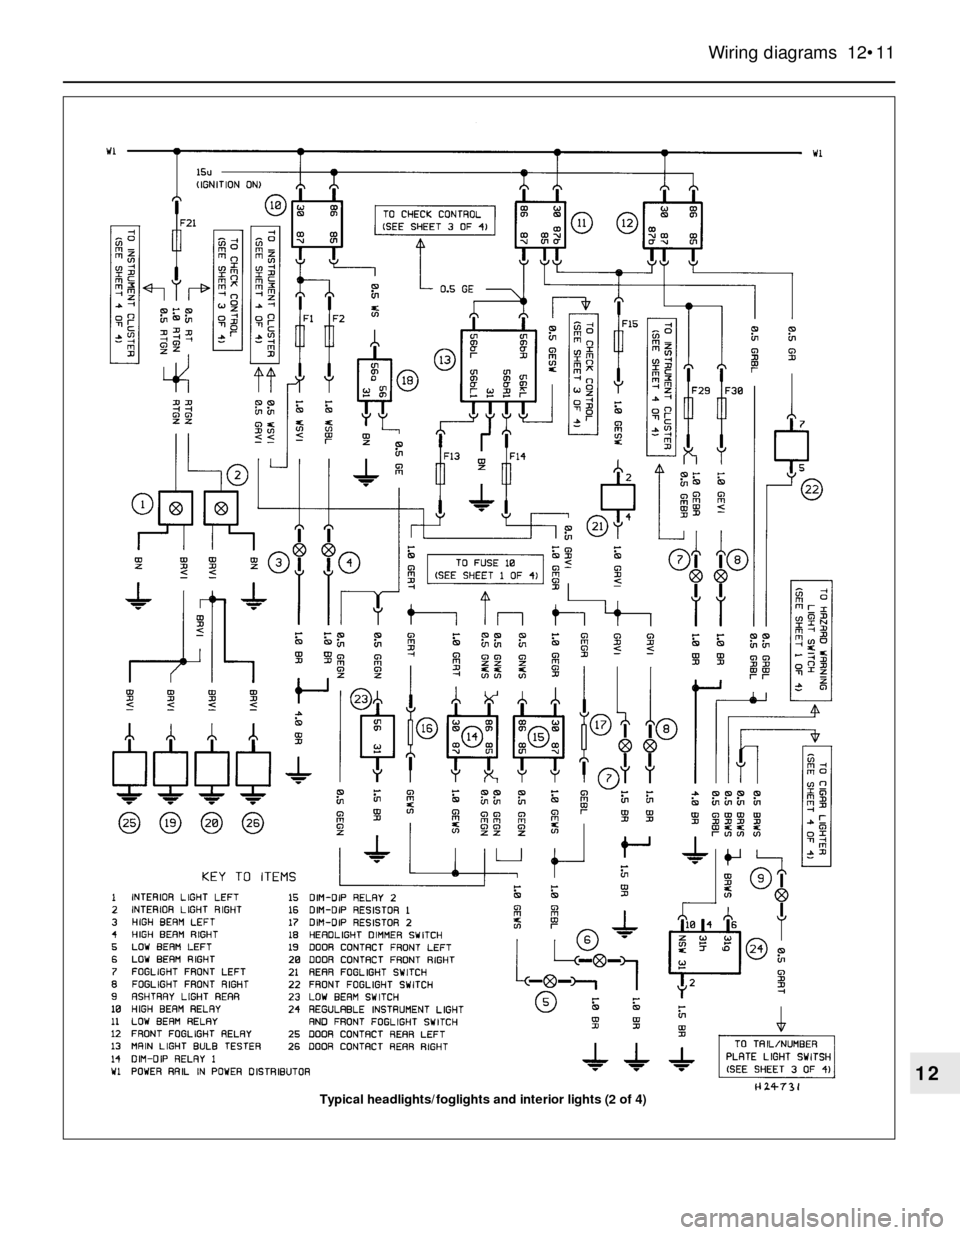 BMW 3 SERIES 1986 E30 Workshop Manual Wiring diagrams  12•11
12
Typical headlights/foglights and interior lights (2 of 4) 